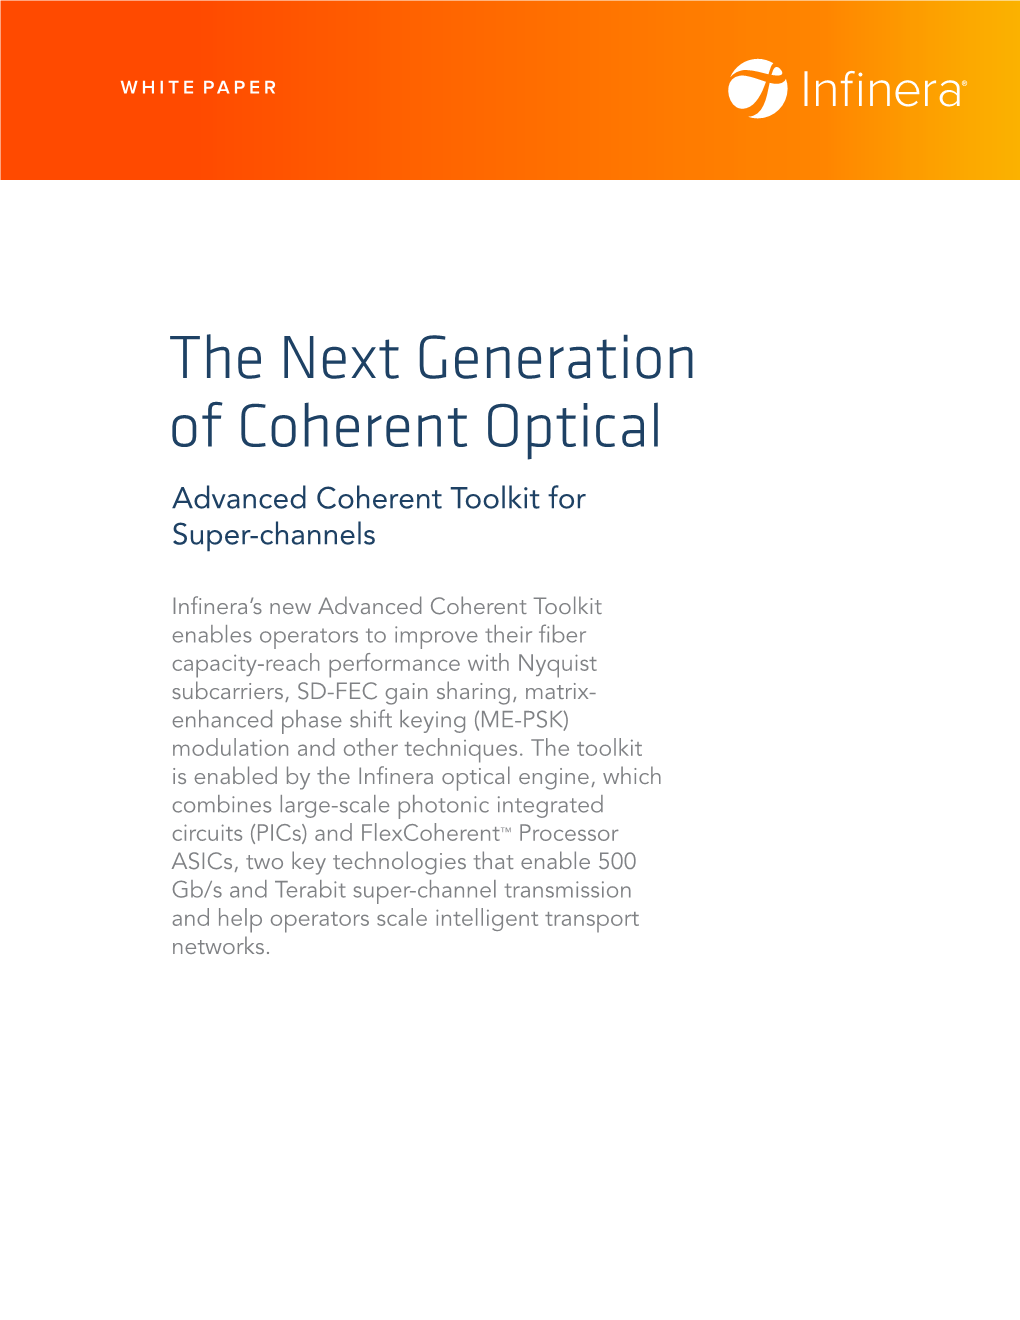 The Next Generation of Coherent Optical Advanced Coherent Toolkit for Super-Channels